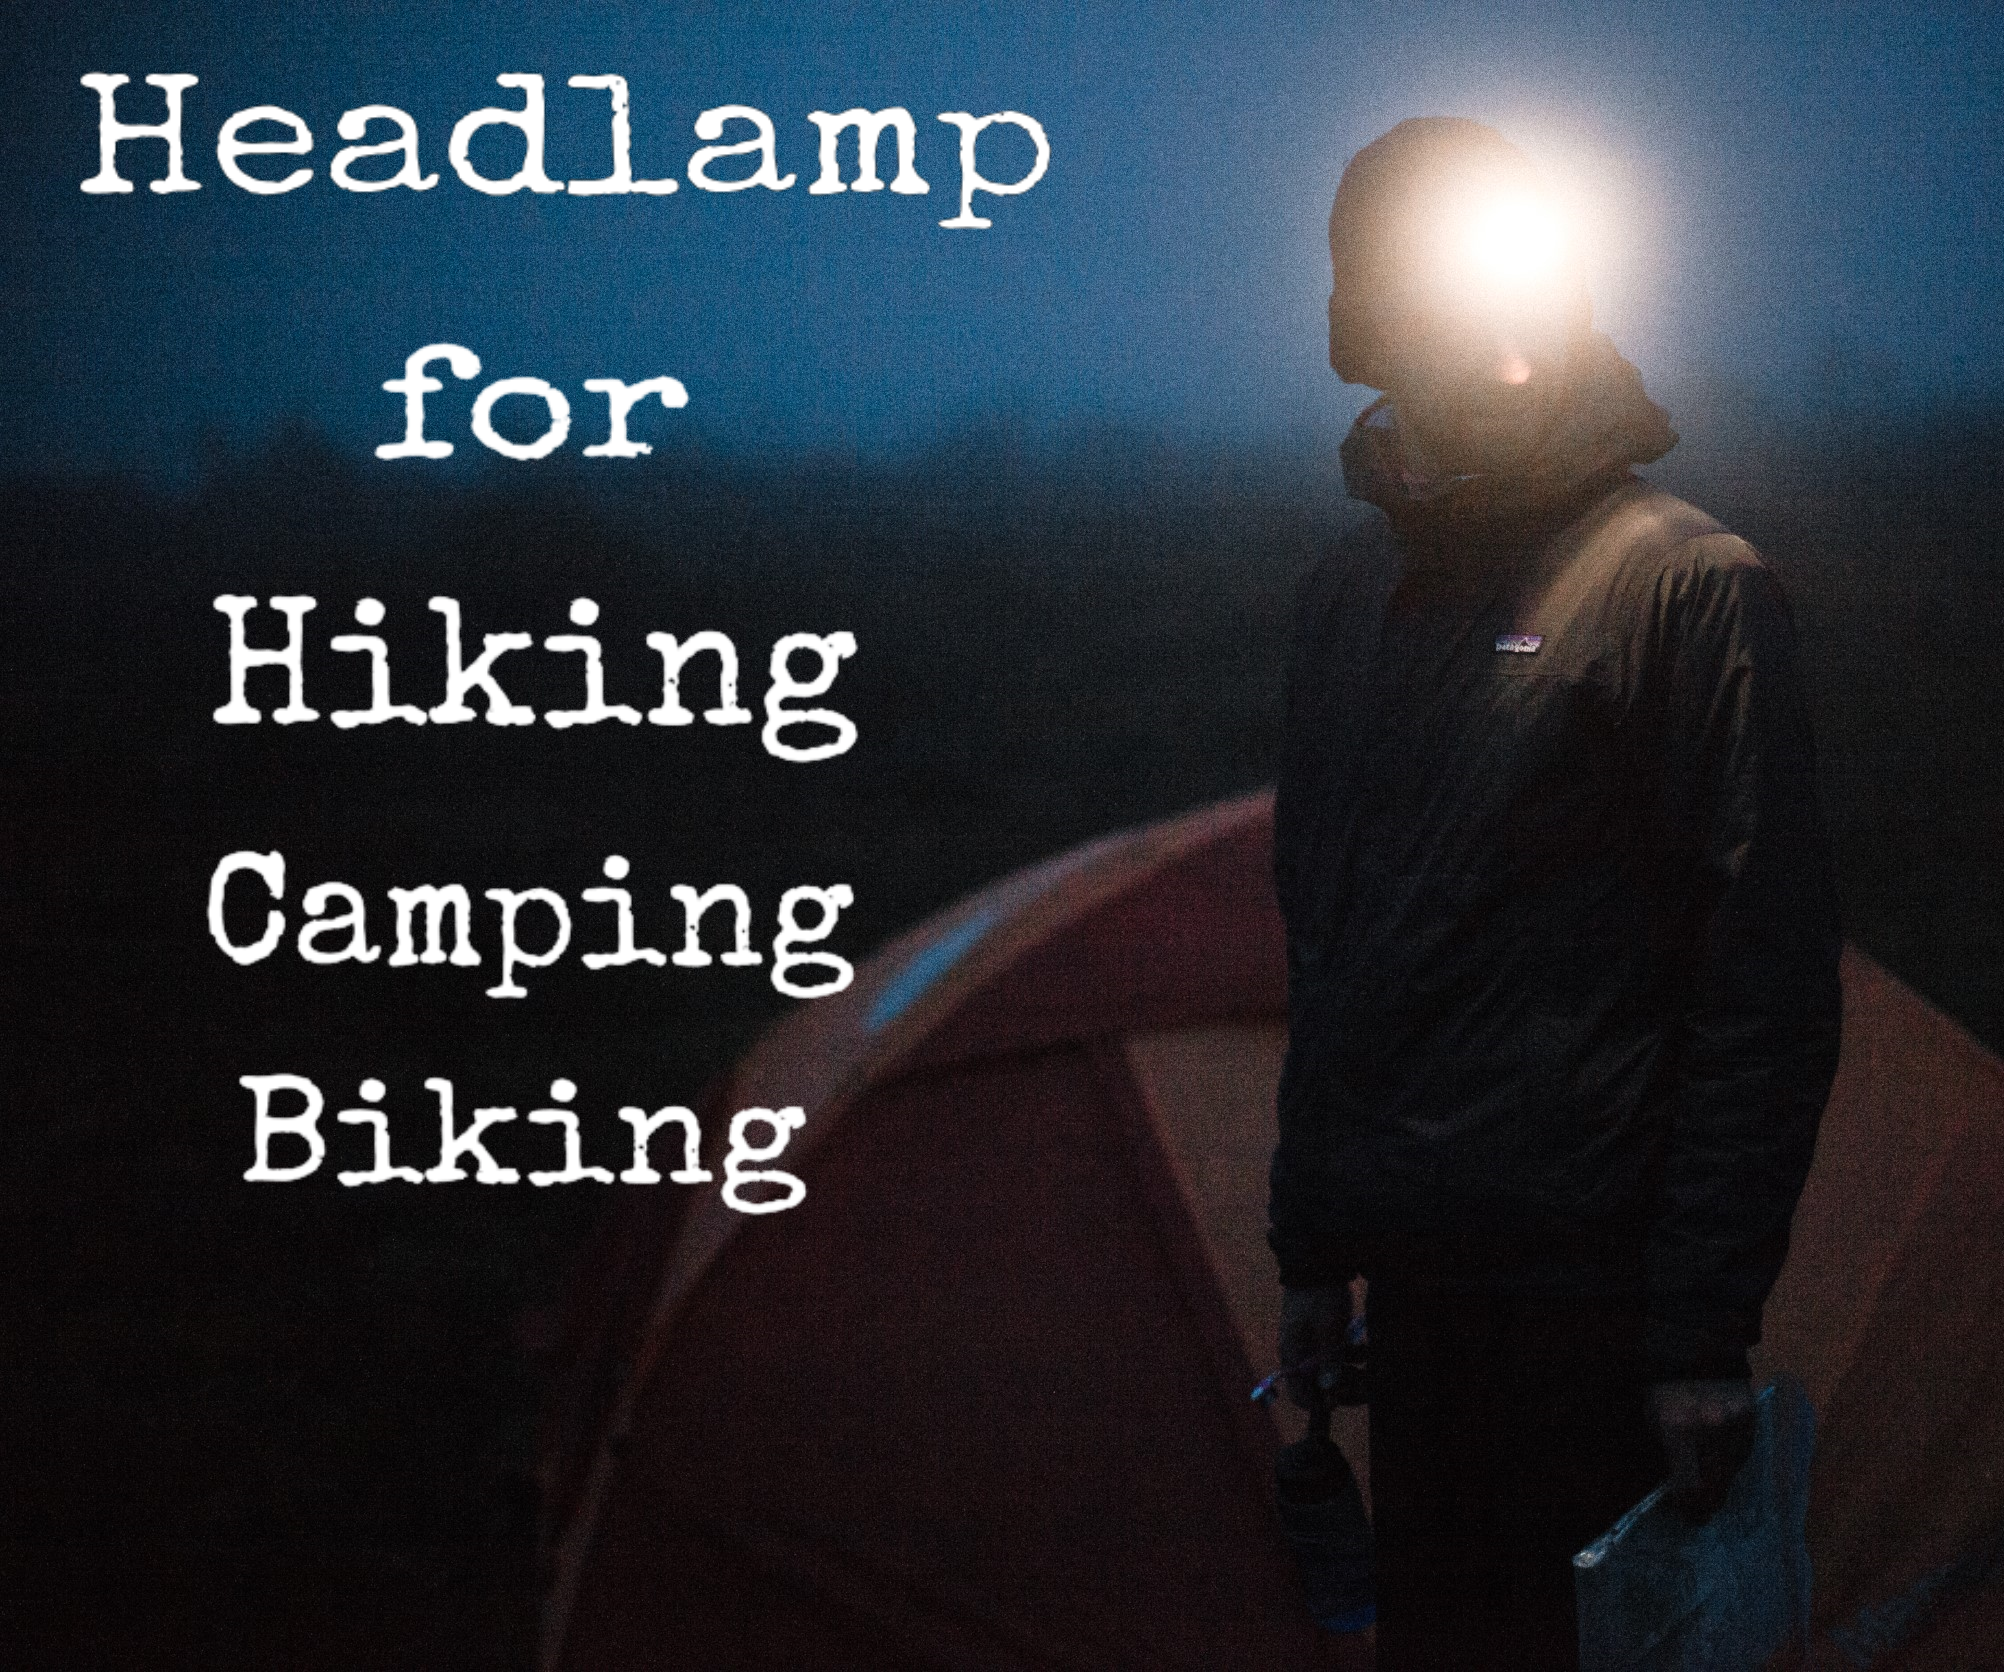 3D Printed HeadLamp With Constant Current Circuit for Hiking, Camping and Biking